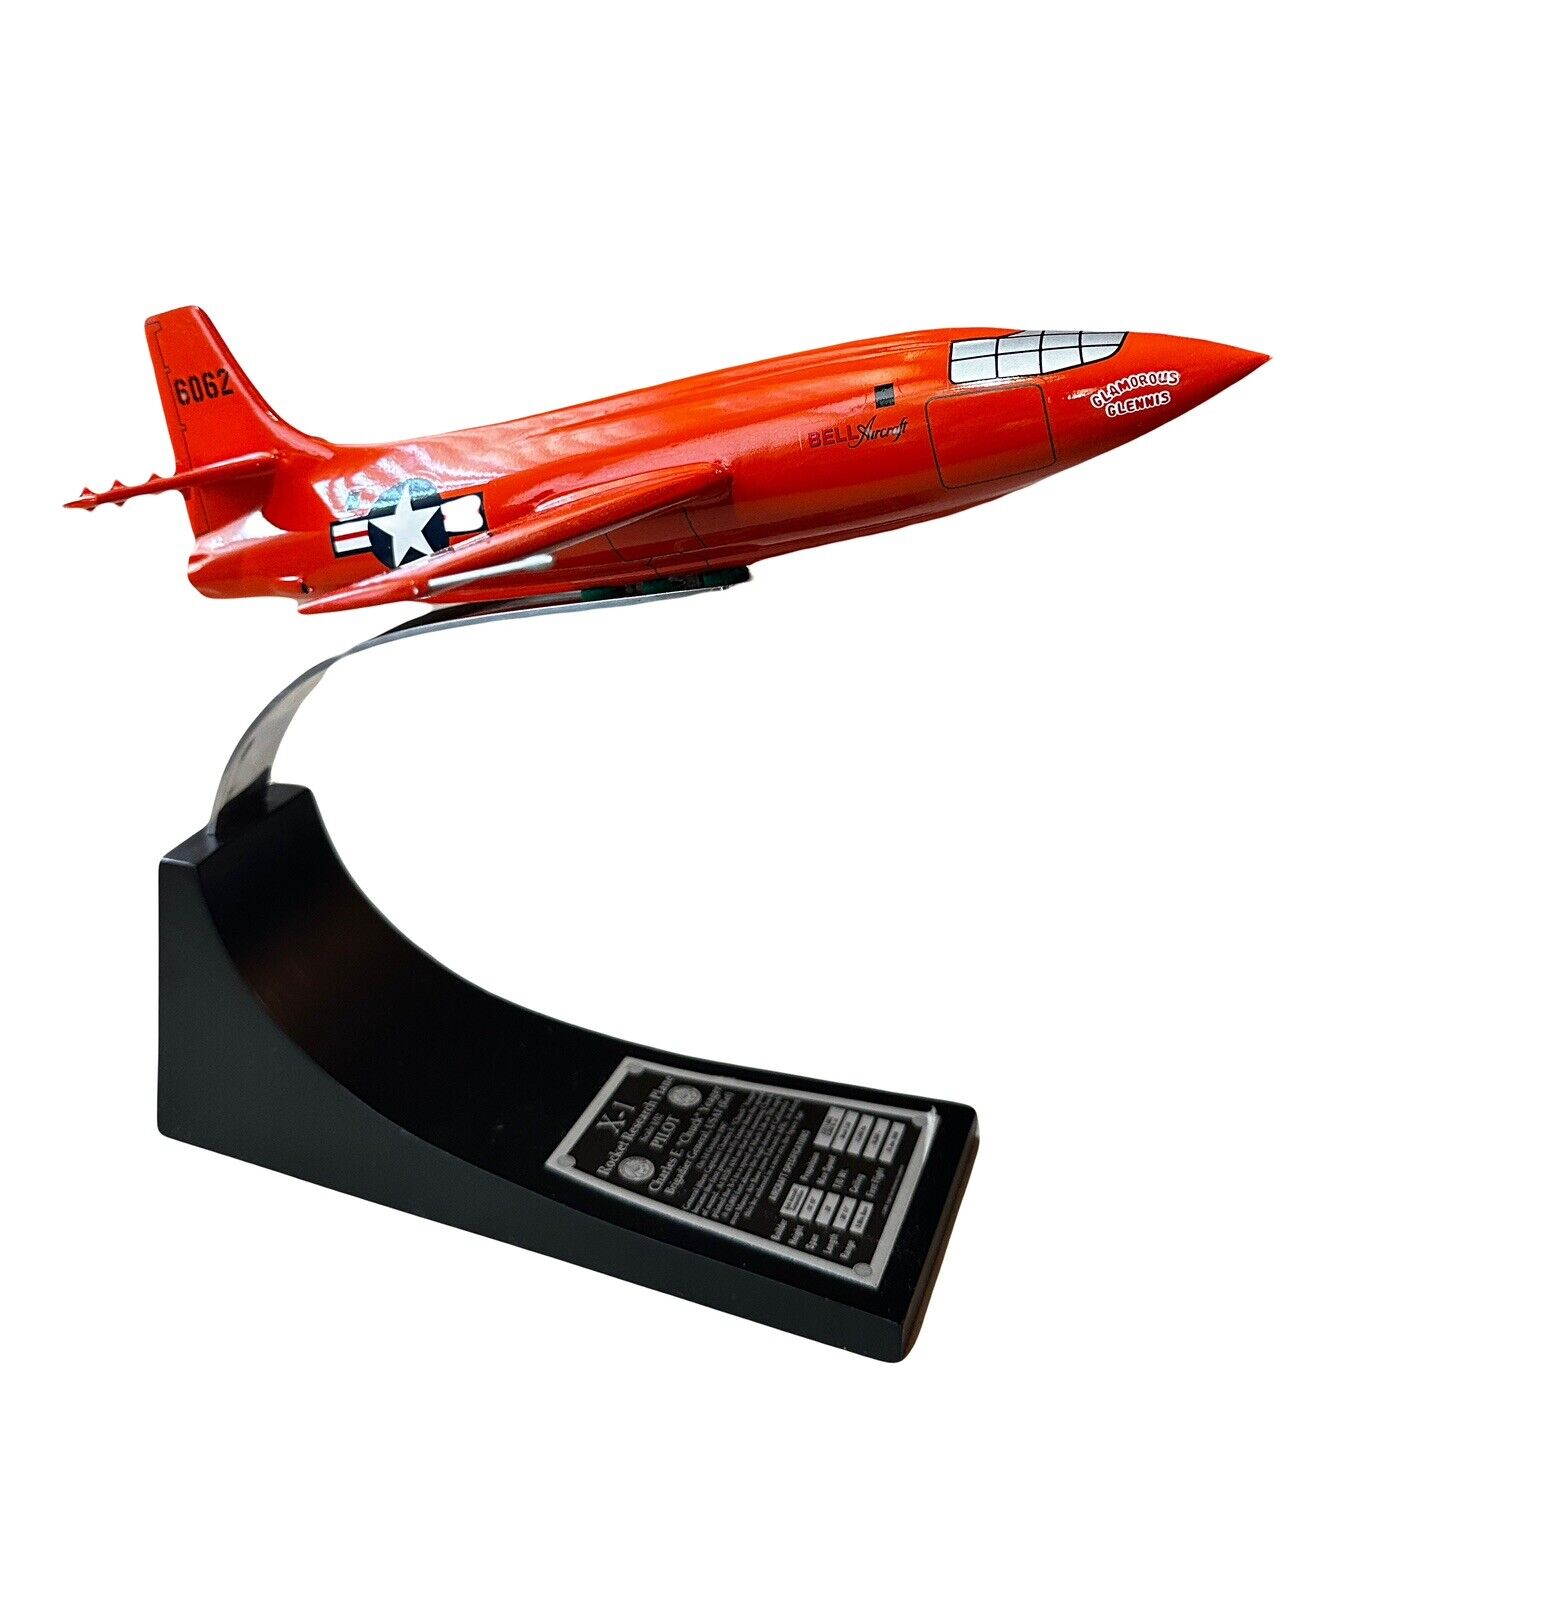 CHUCK YEAGER SPEED OF SOUND ACE PILOT SIGNED AUTO X-1 BELL JET ROCKET 1/32 Scale